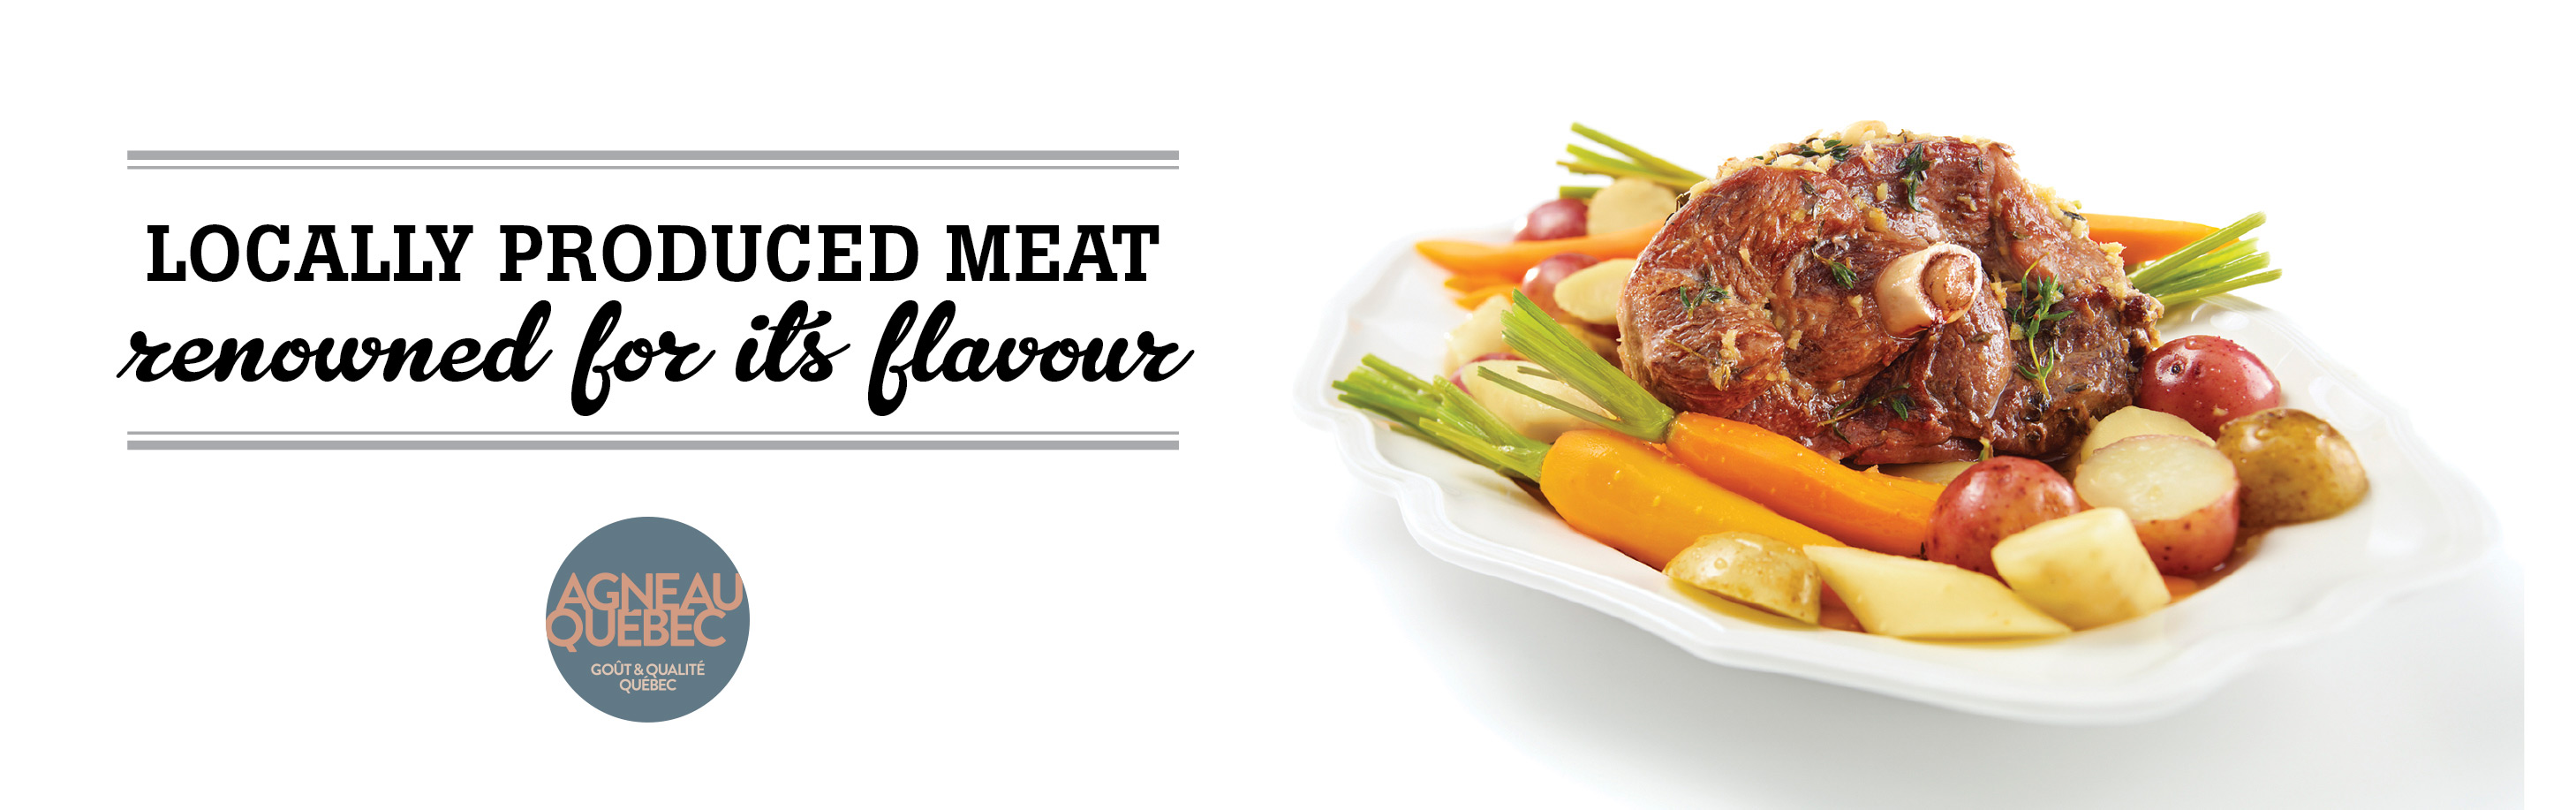 Locally produced meat, renowned for its flavour